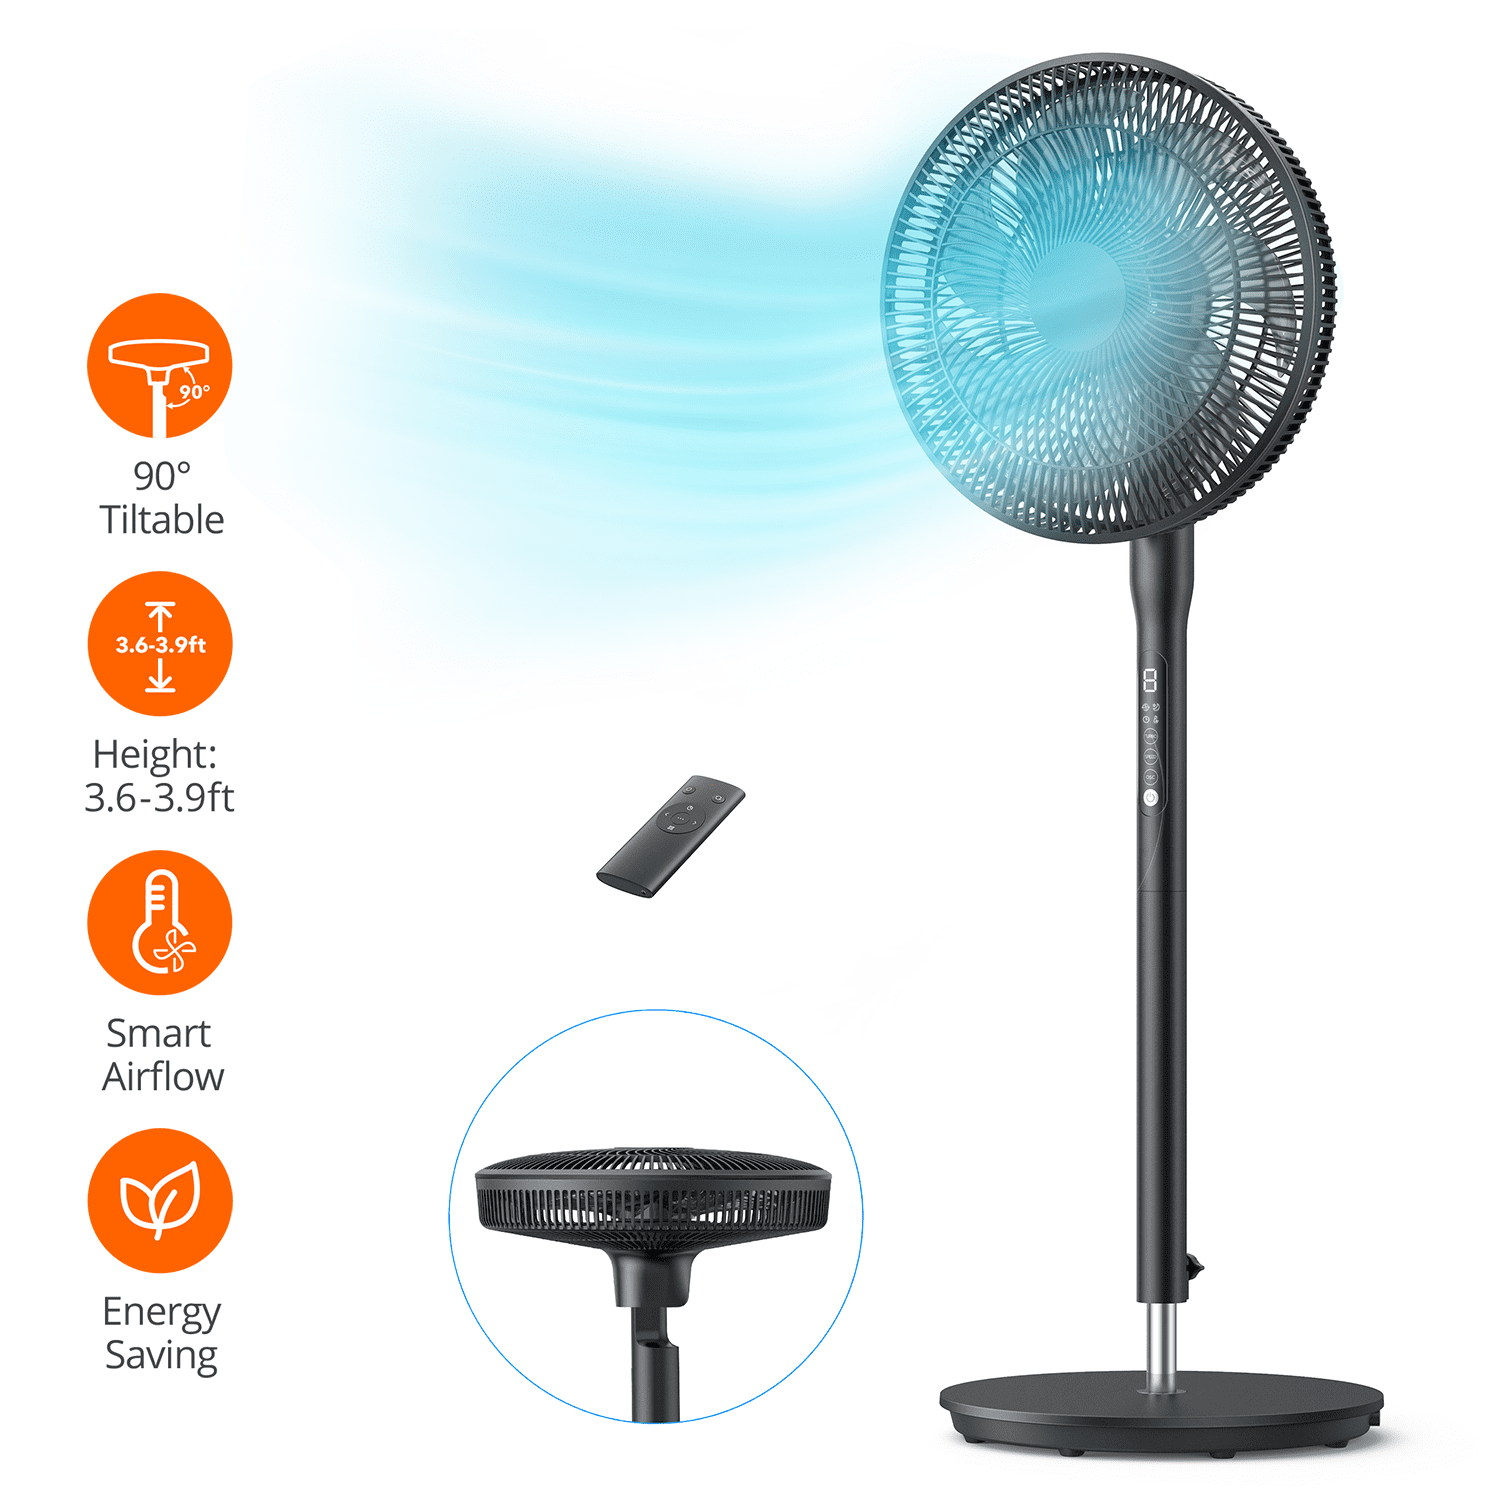 New16" PEDESTAL OSCILLATING STAND STANDING COOLING FAN OFFICE HOME COOL AIRTOWER 